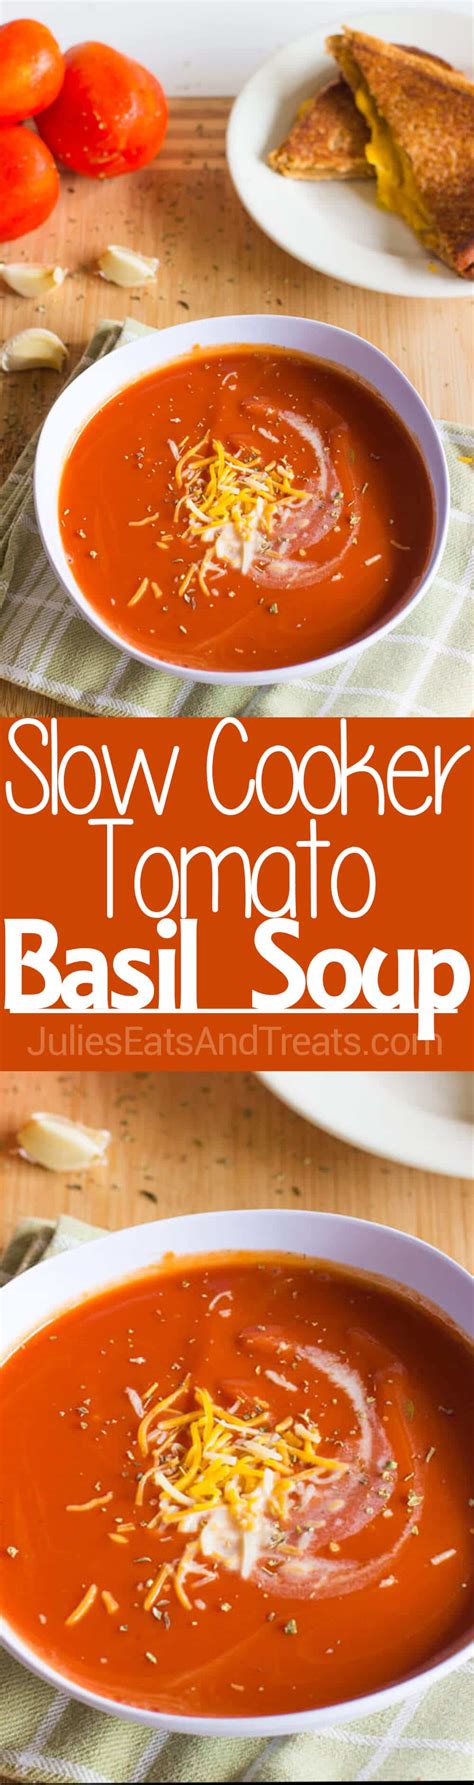 The worst tomato soups either have little tomato flavor or they taste old, sour, overprocessed or candy sweet. Slow Cooker Tomato Basil Soup - Julie's Eats & Treats